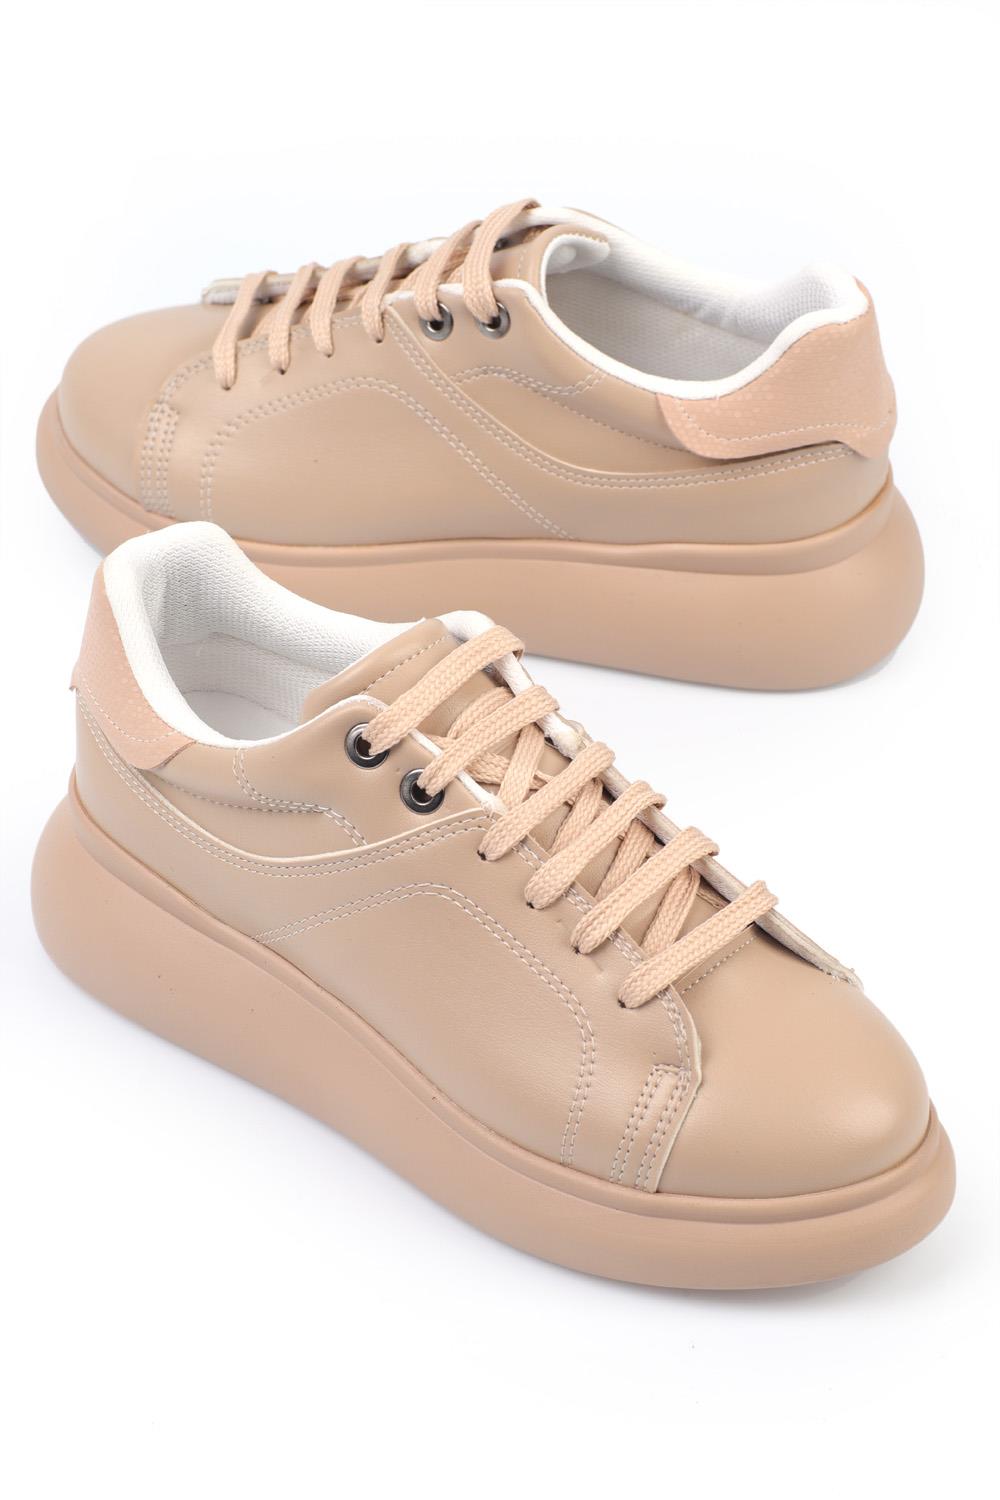 Capone Women Nudes Sneakers